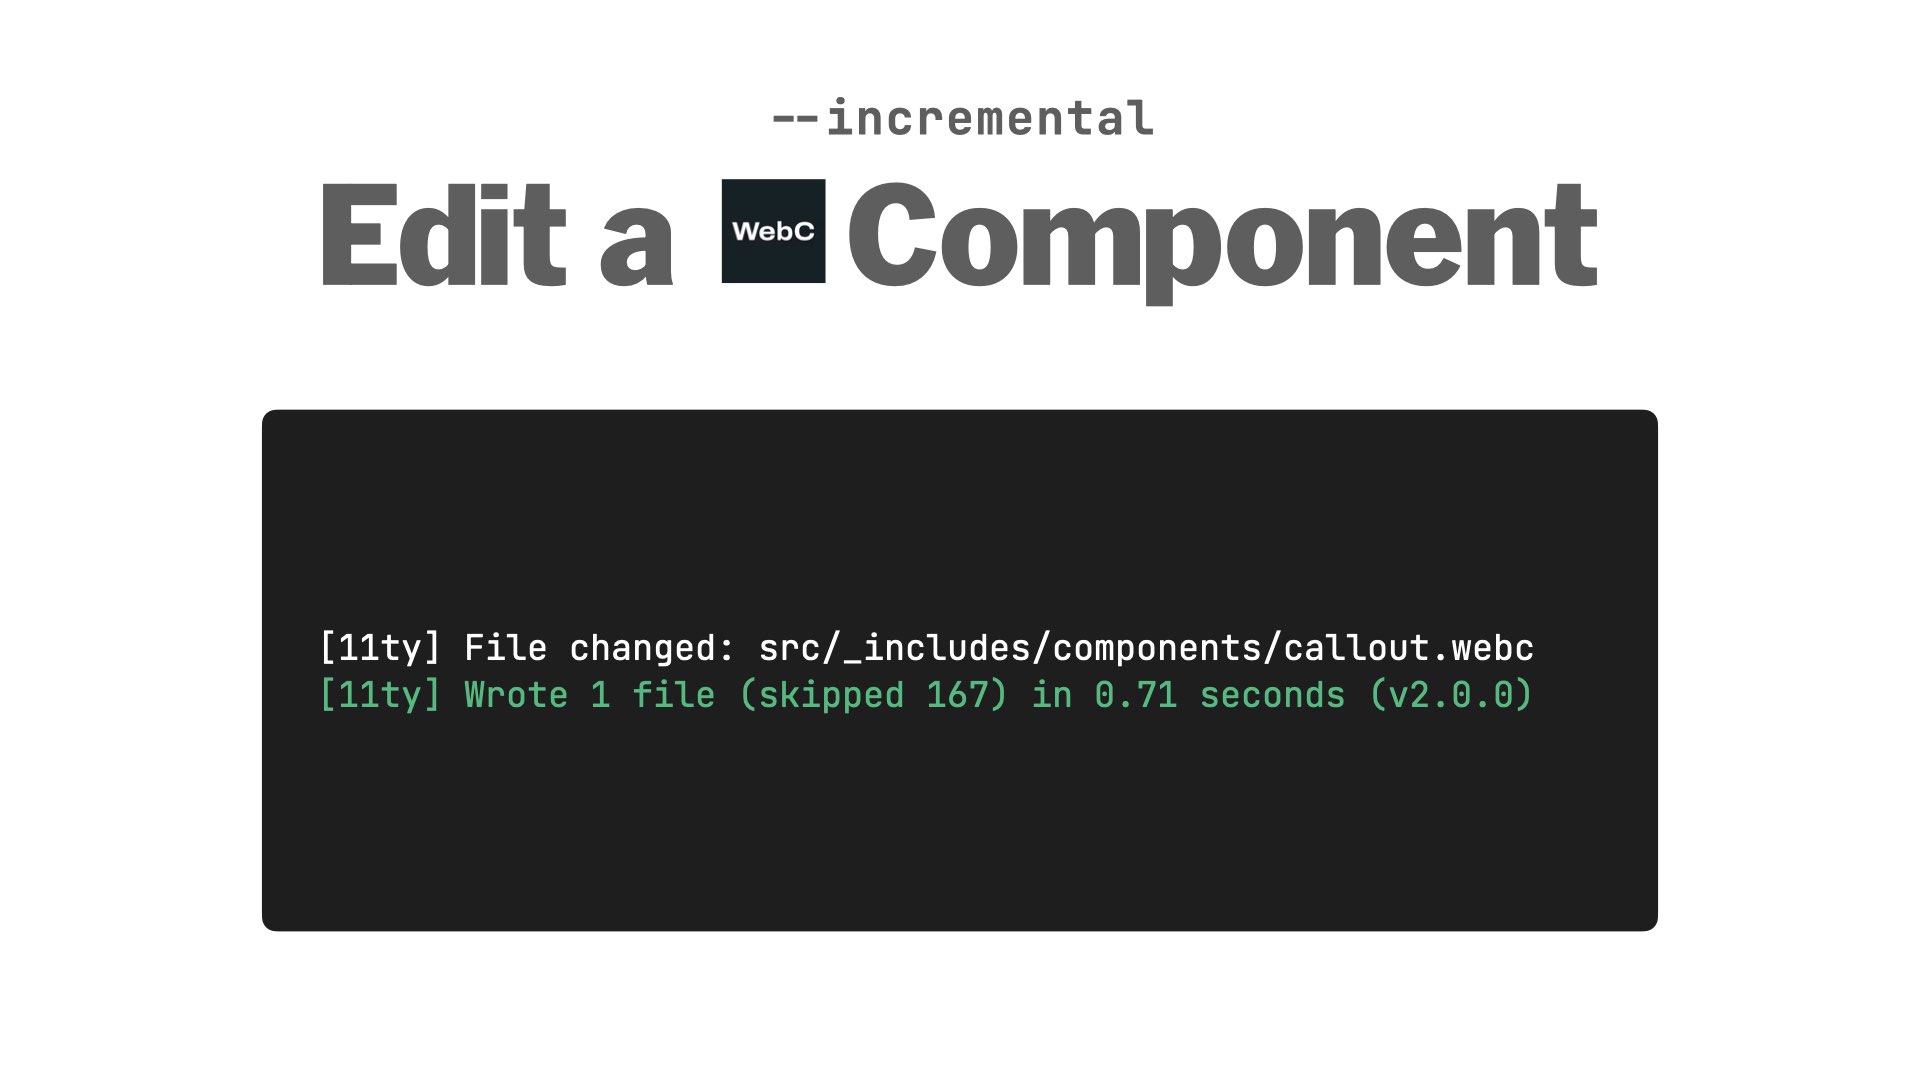 Terminal showing an incremental build, component file changed: src/_includes/components/callout.webc, Wrote 1 file (skipped 167) in 0.71 seconds